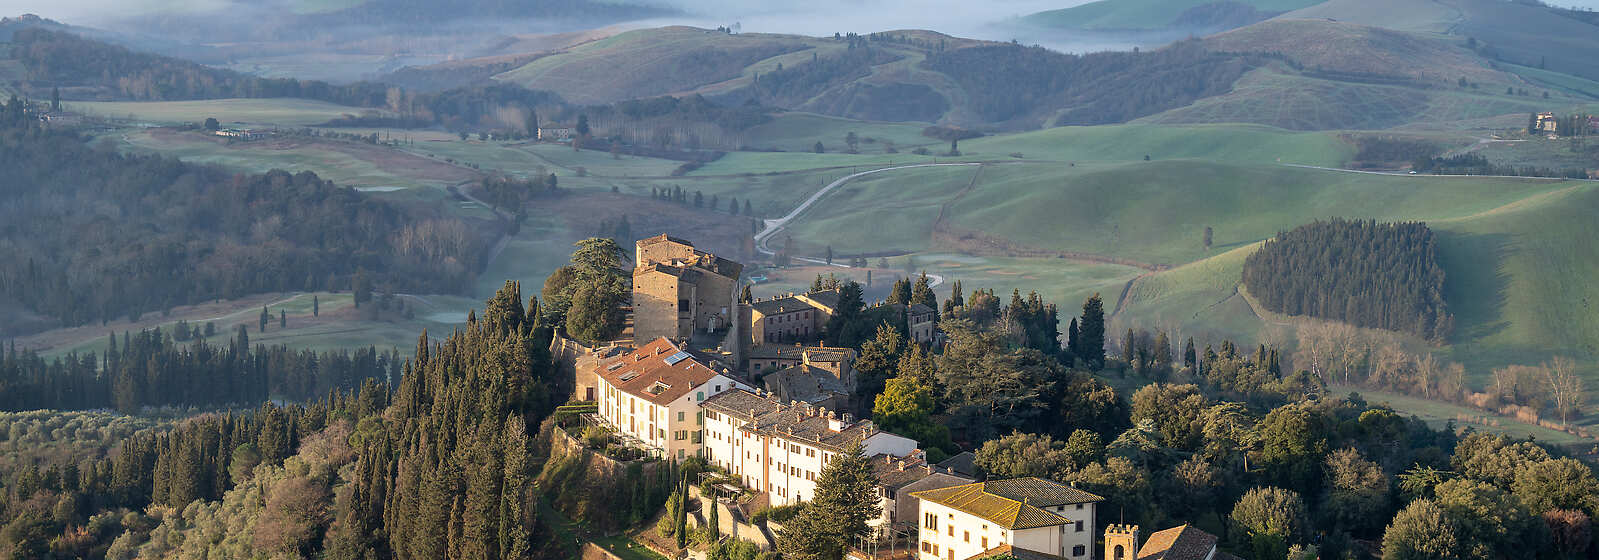 An aerial shot of Castelfalfi village and the surrounding owned estate.